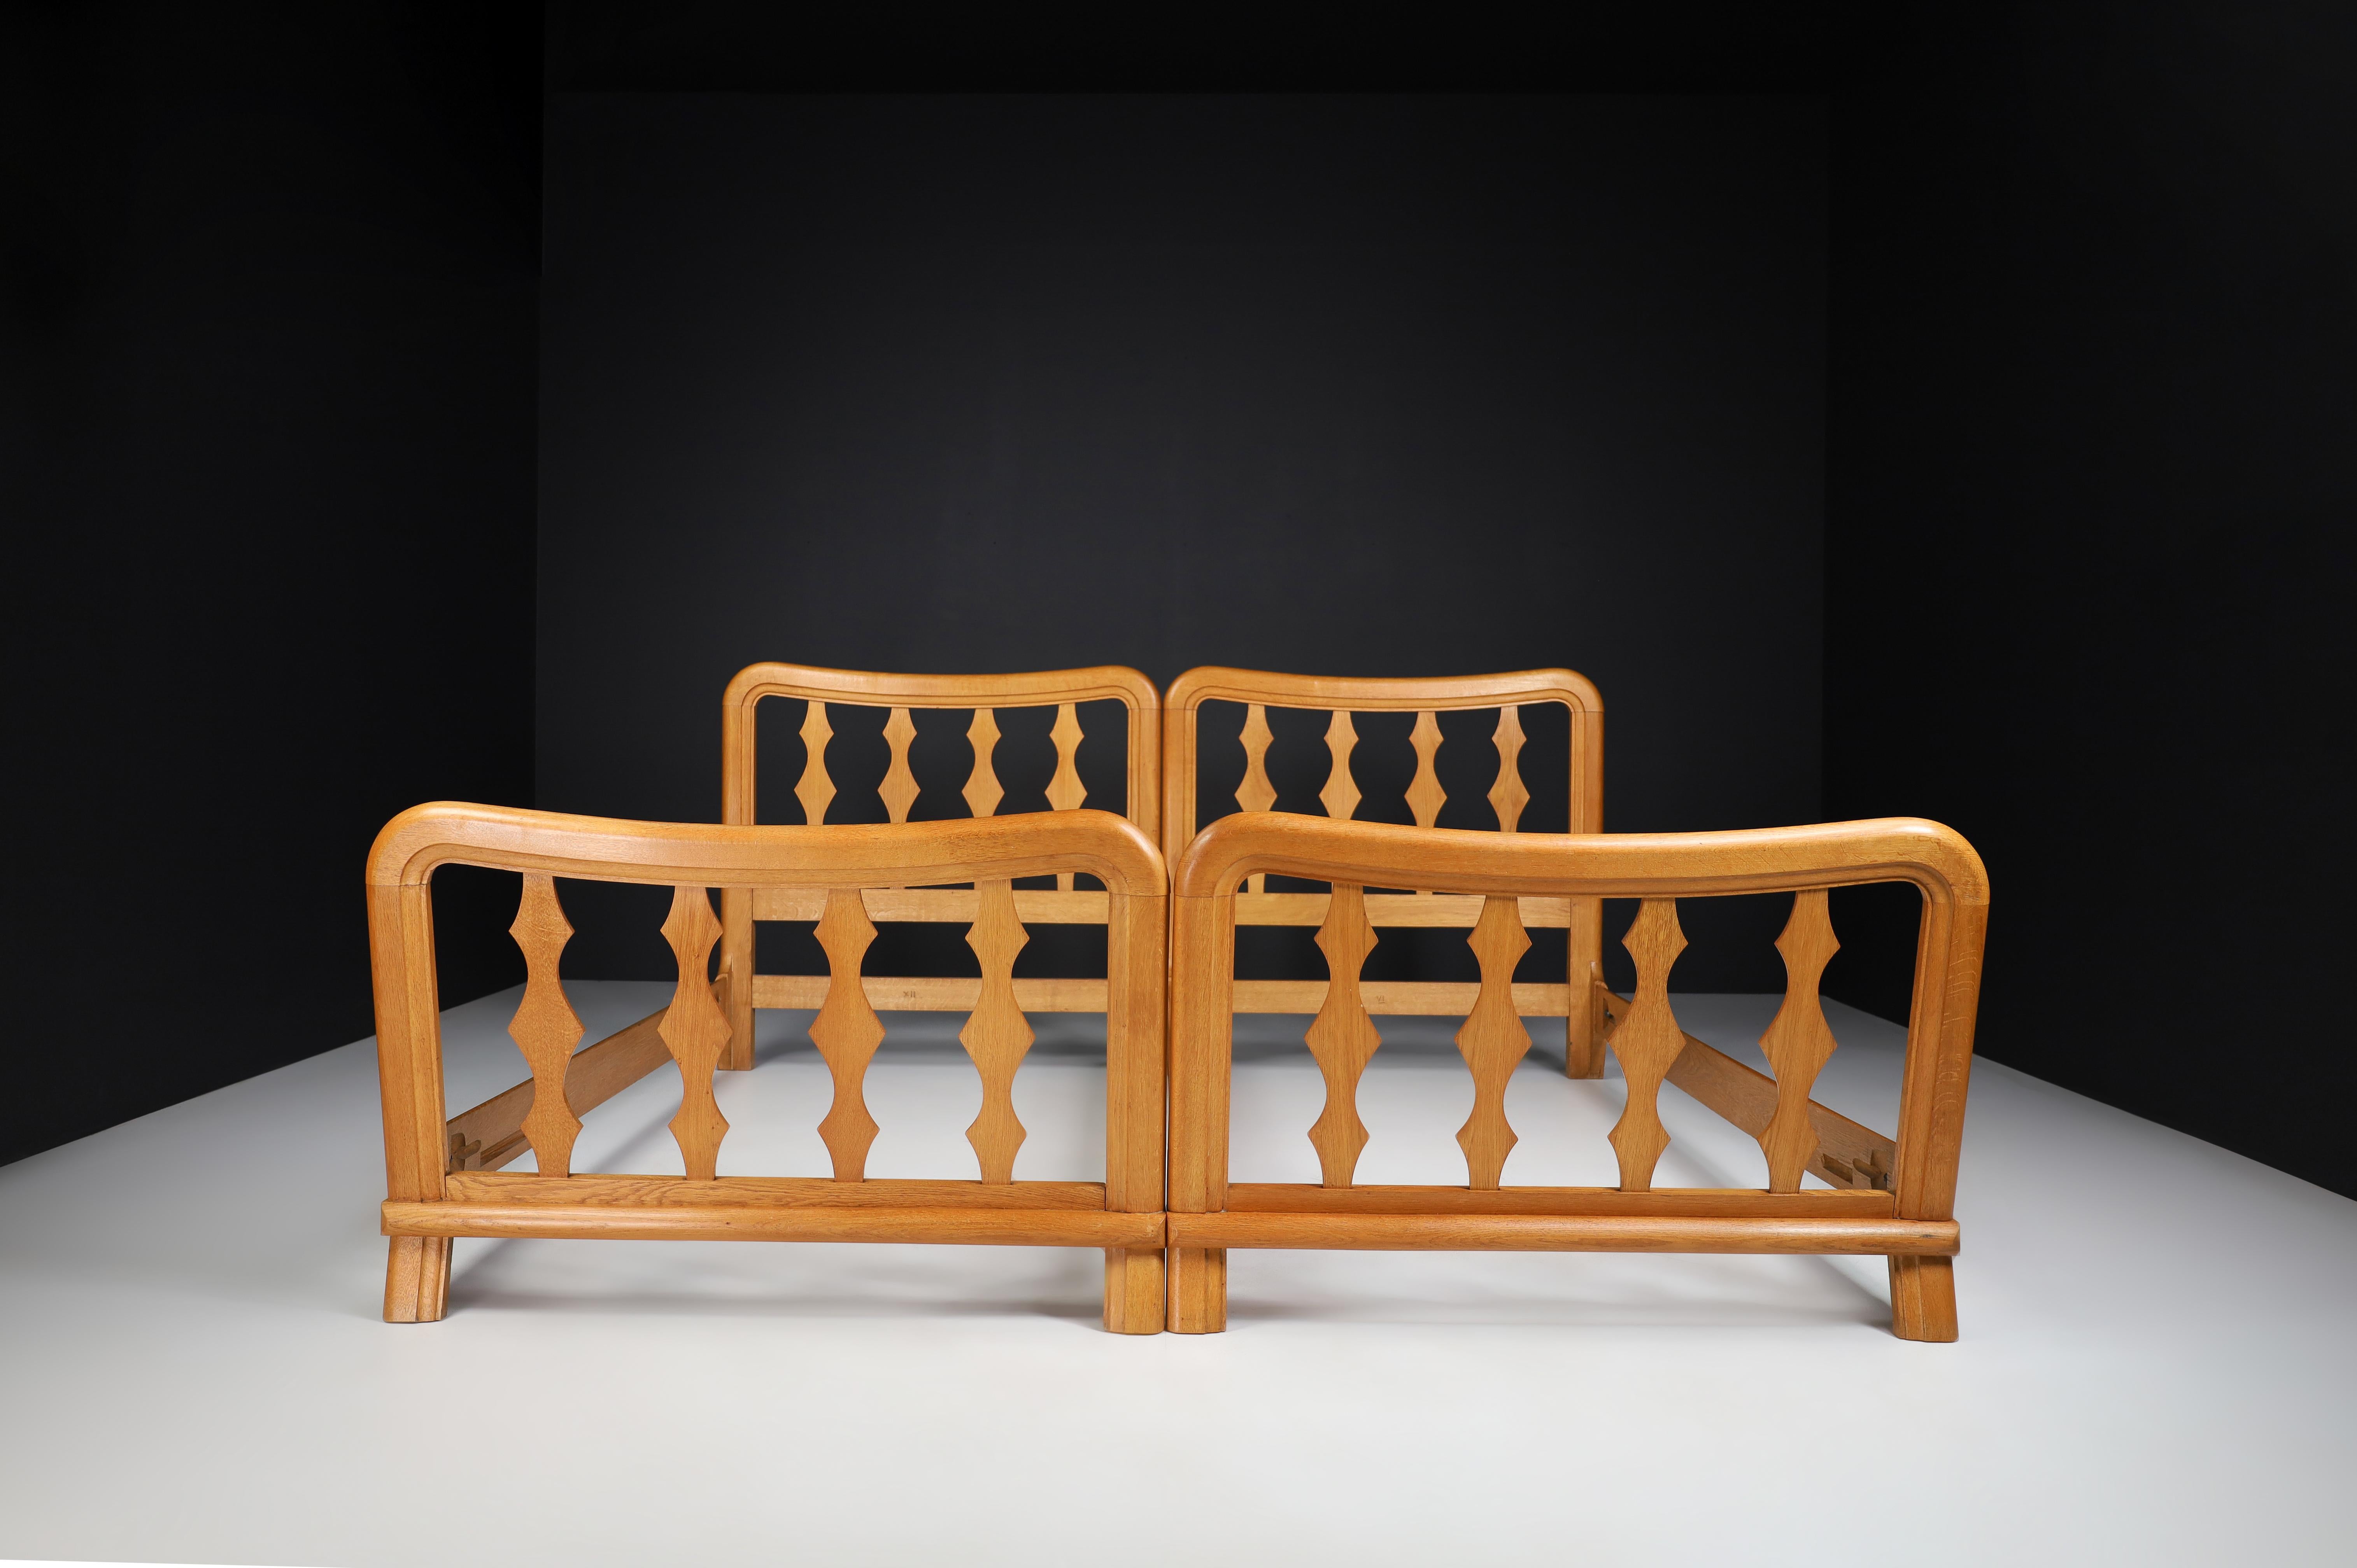 Mid-Century Modern Guillerme & Chambron Bed in Solid blond Oak, France 1960s

This beautiful bed was made in France in 1960 and has a crafted oak frame with gorgeous sculpted detailing on the slats. Note priced per single bed.

The company,